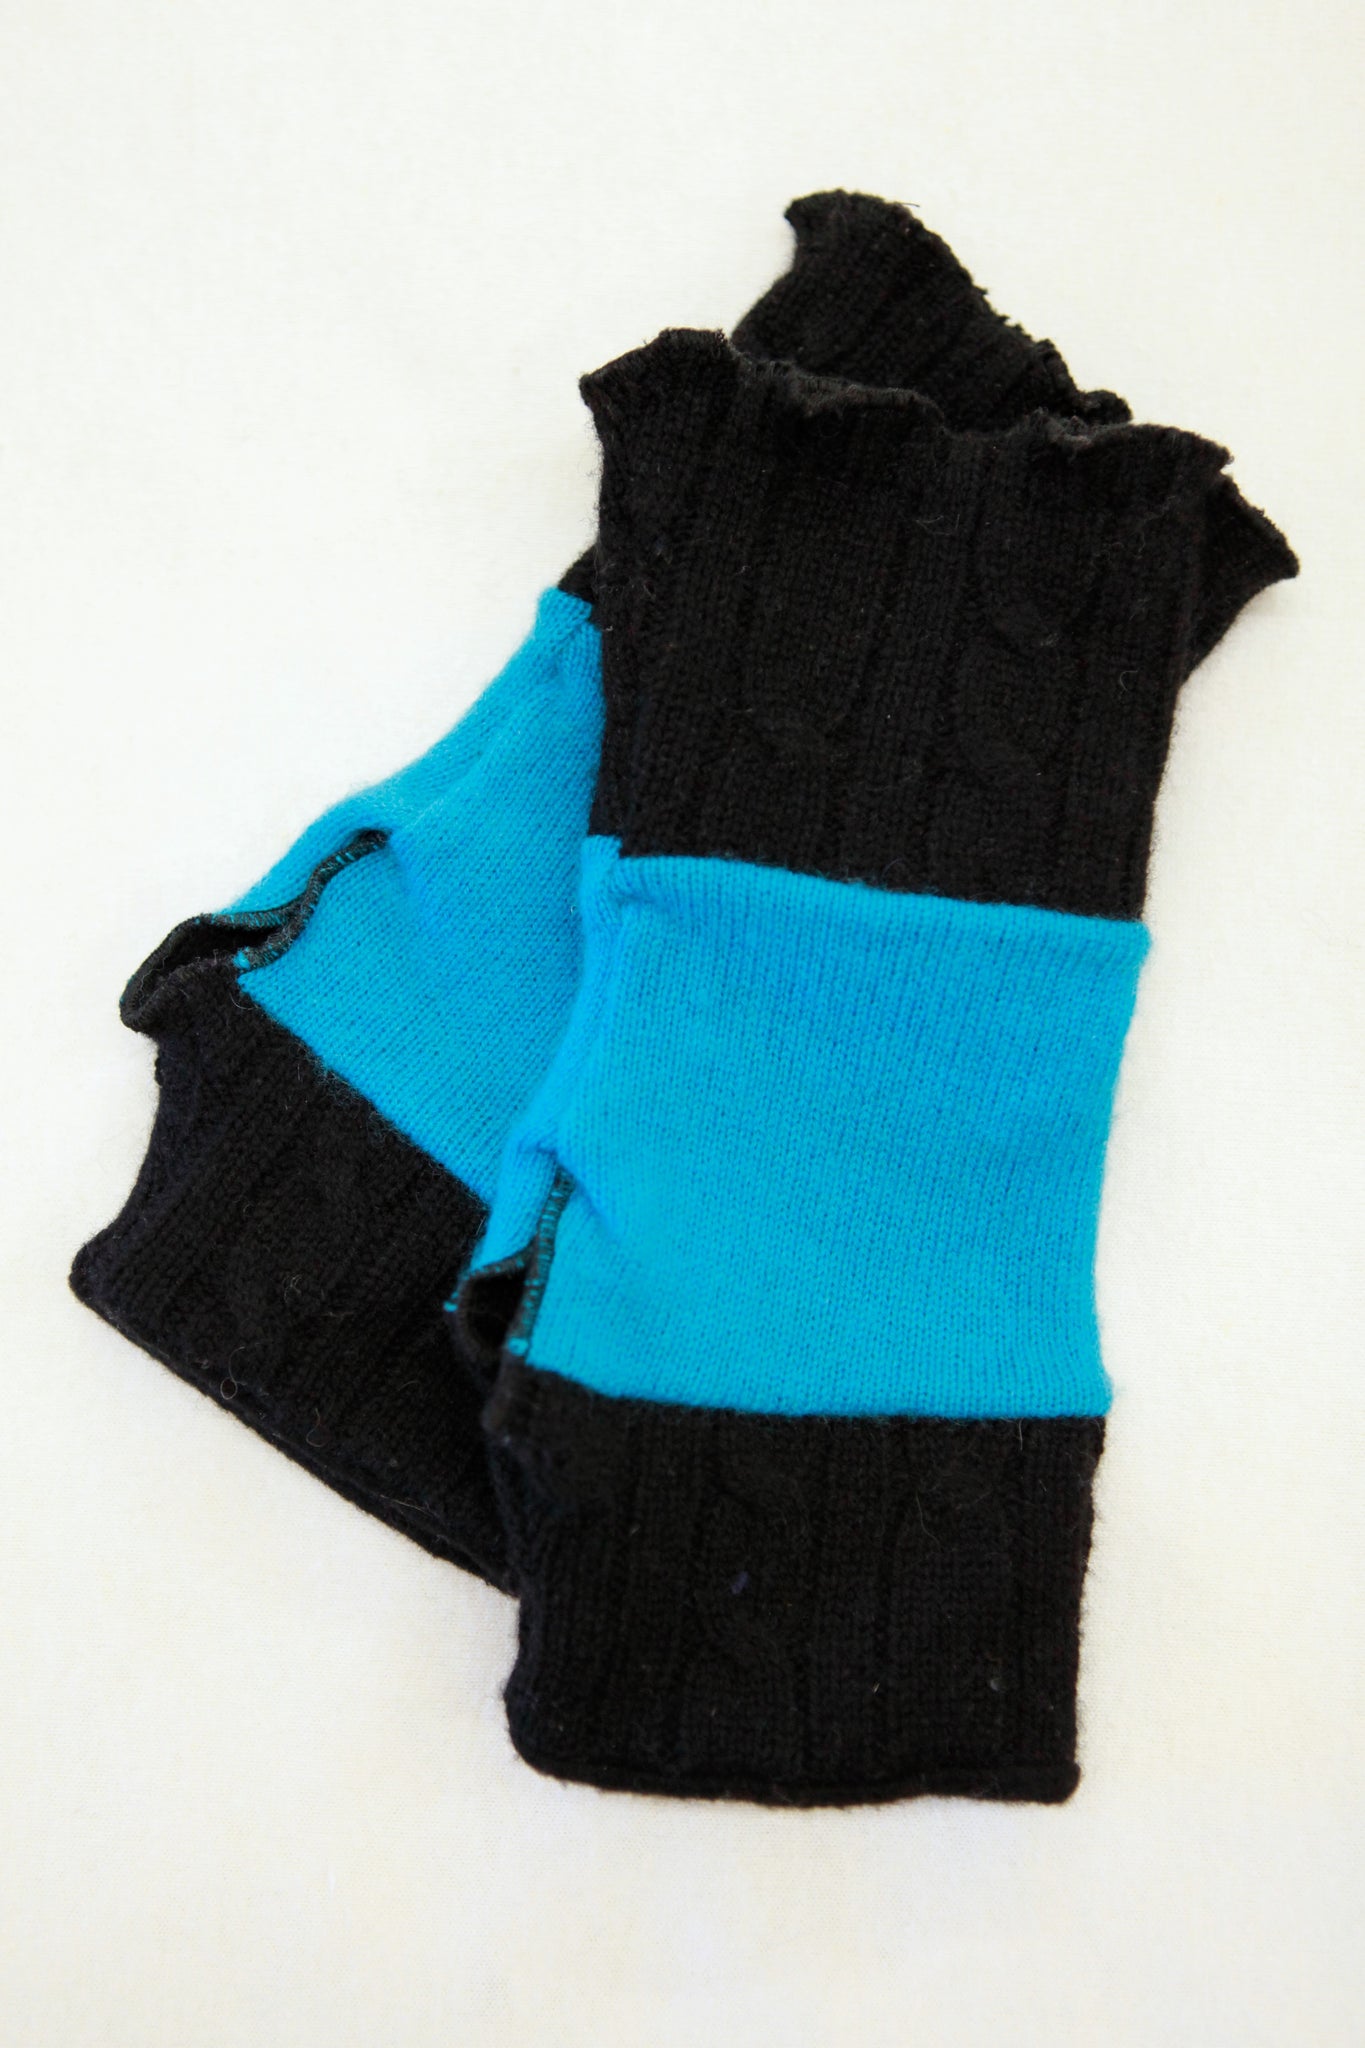 Neon Black Cable Arm Warmers